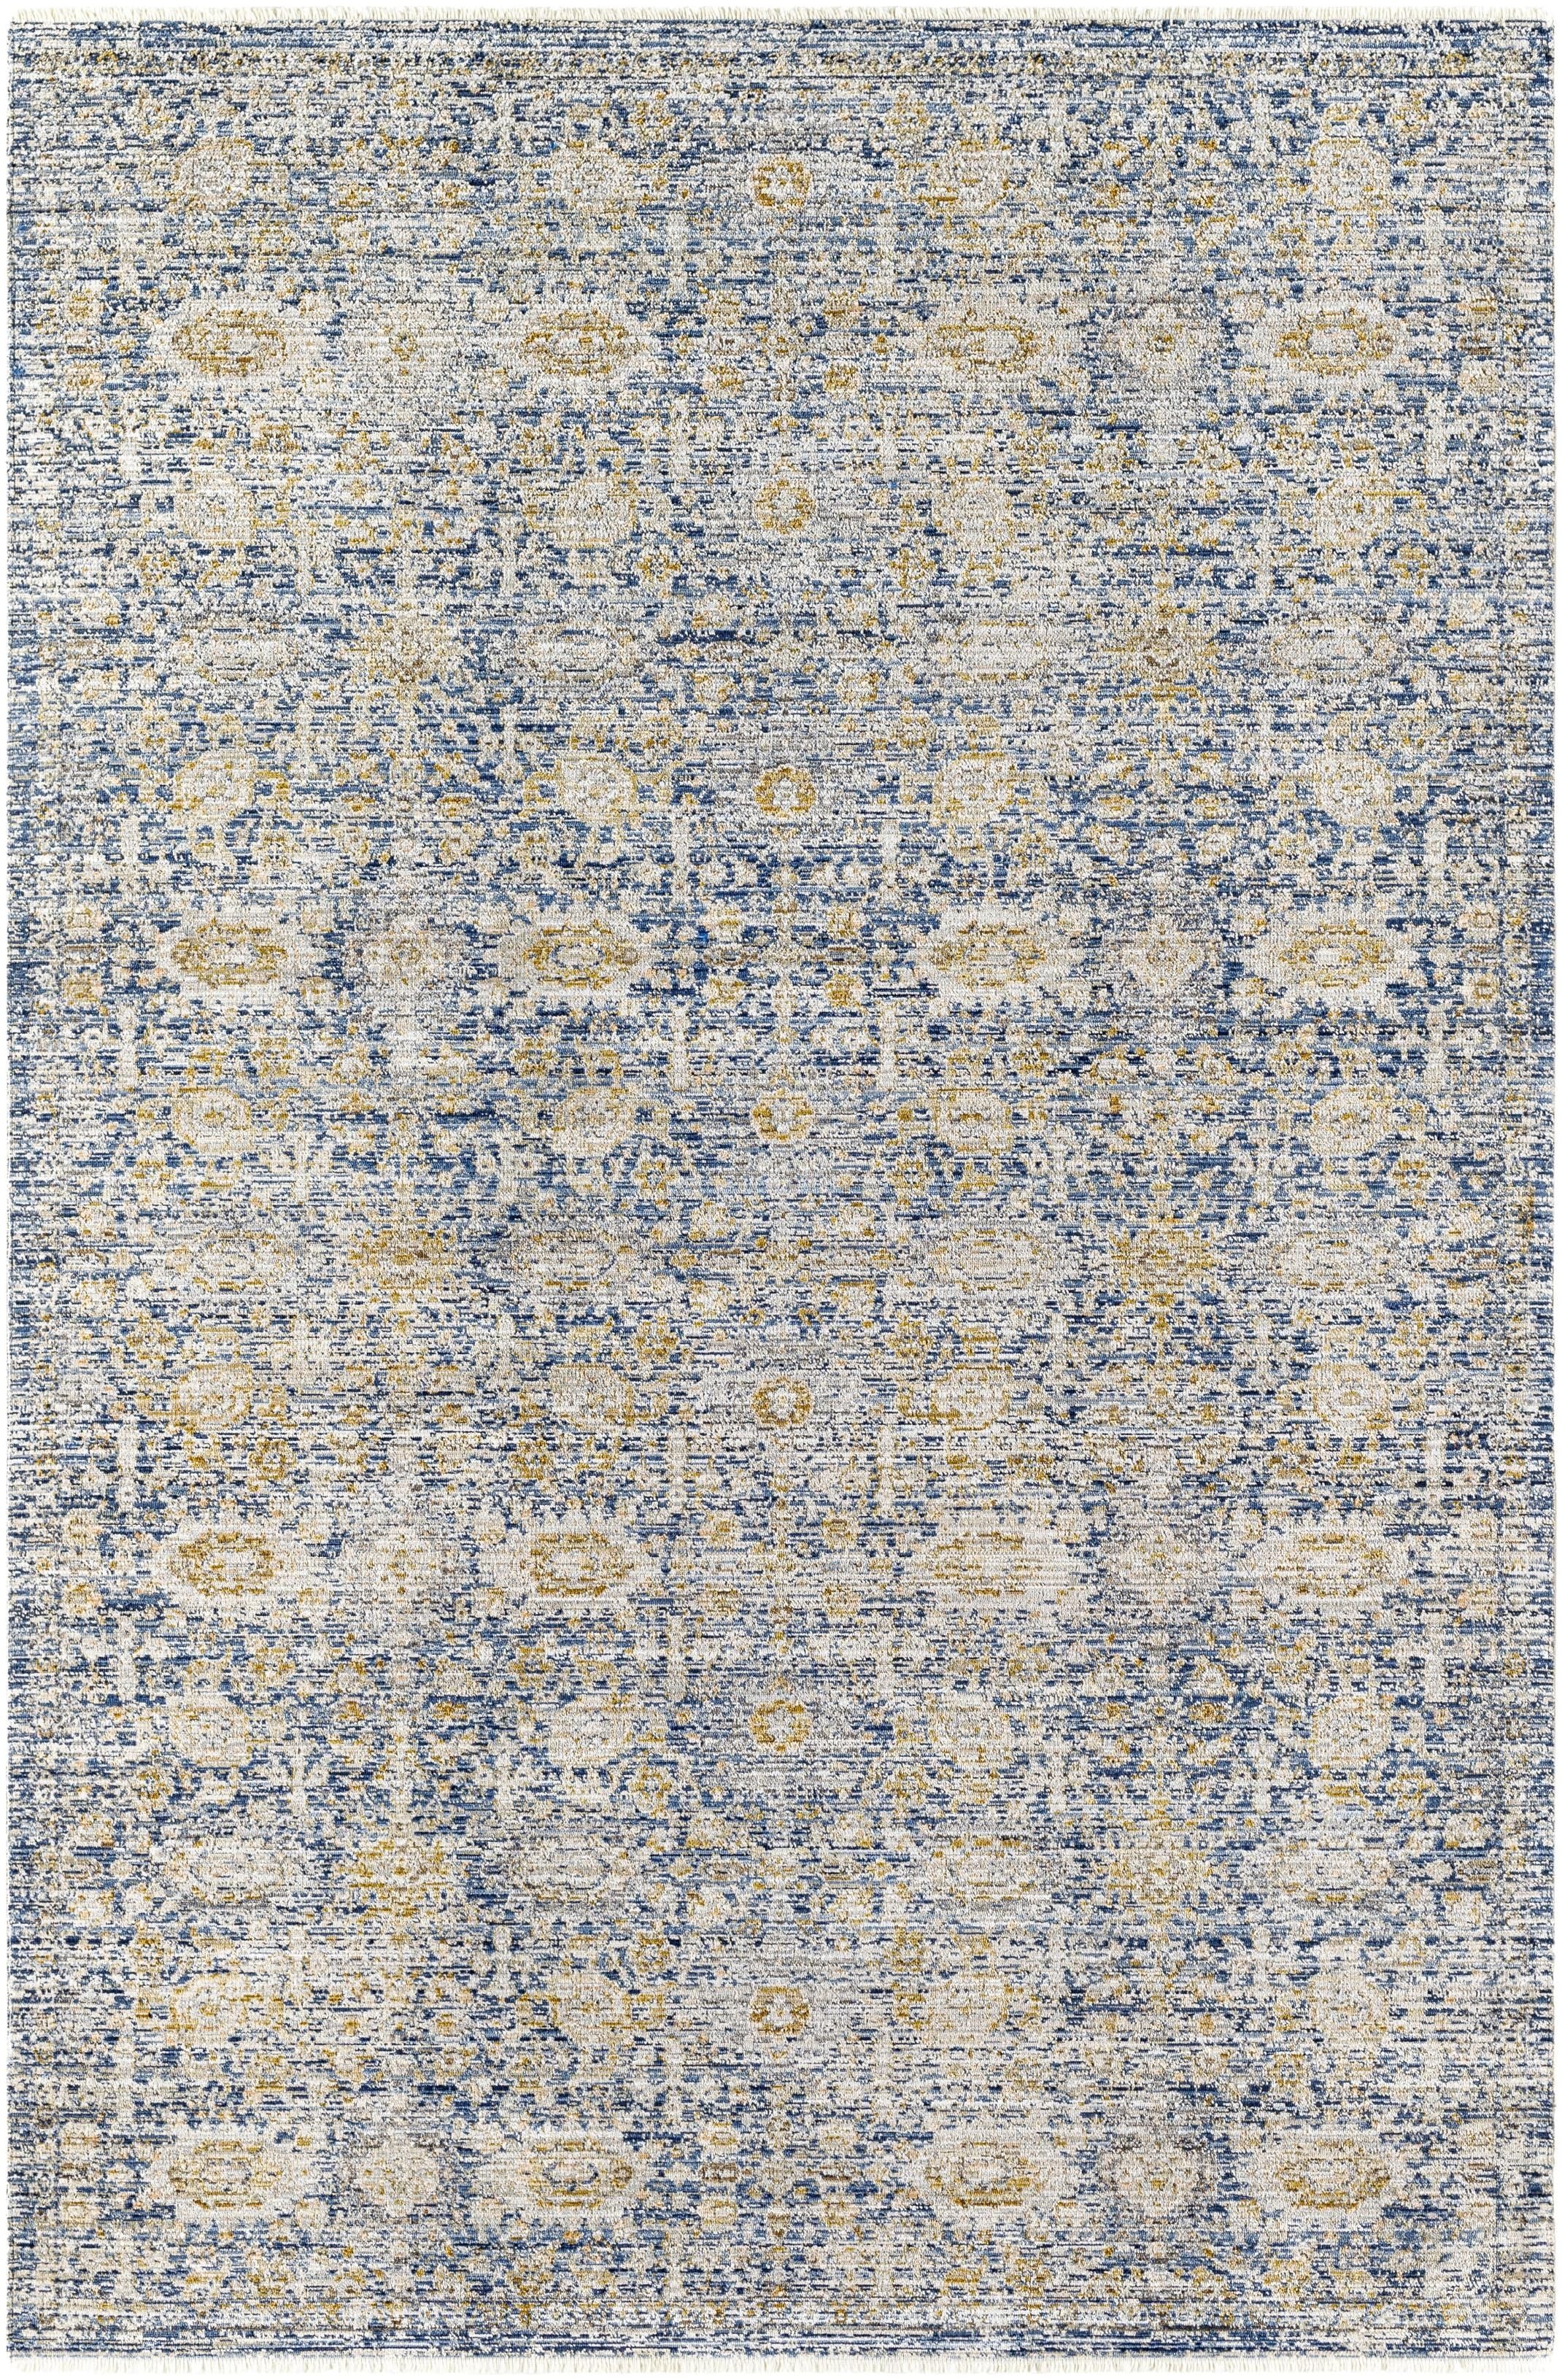 Introducing the Margaret area rug, designed as a special collaboration for our Becki Owens x Surya line! This exquisite rug is sure to transform any space into a beautiful oasis. It features a vintage floral design, crafted with polyester for maximum durability. The main colors of navy and taupe are woven together to create a stunning effect. Amethyst Home provides interior design, new home construction design consulting, vintage area rugs, and lighting in the Austin metro area.